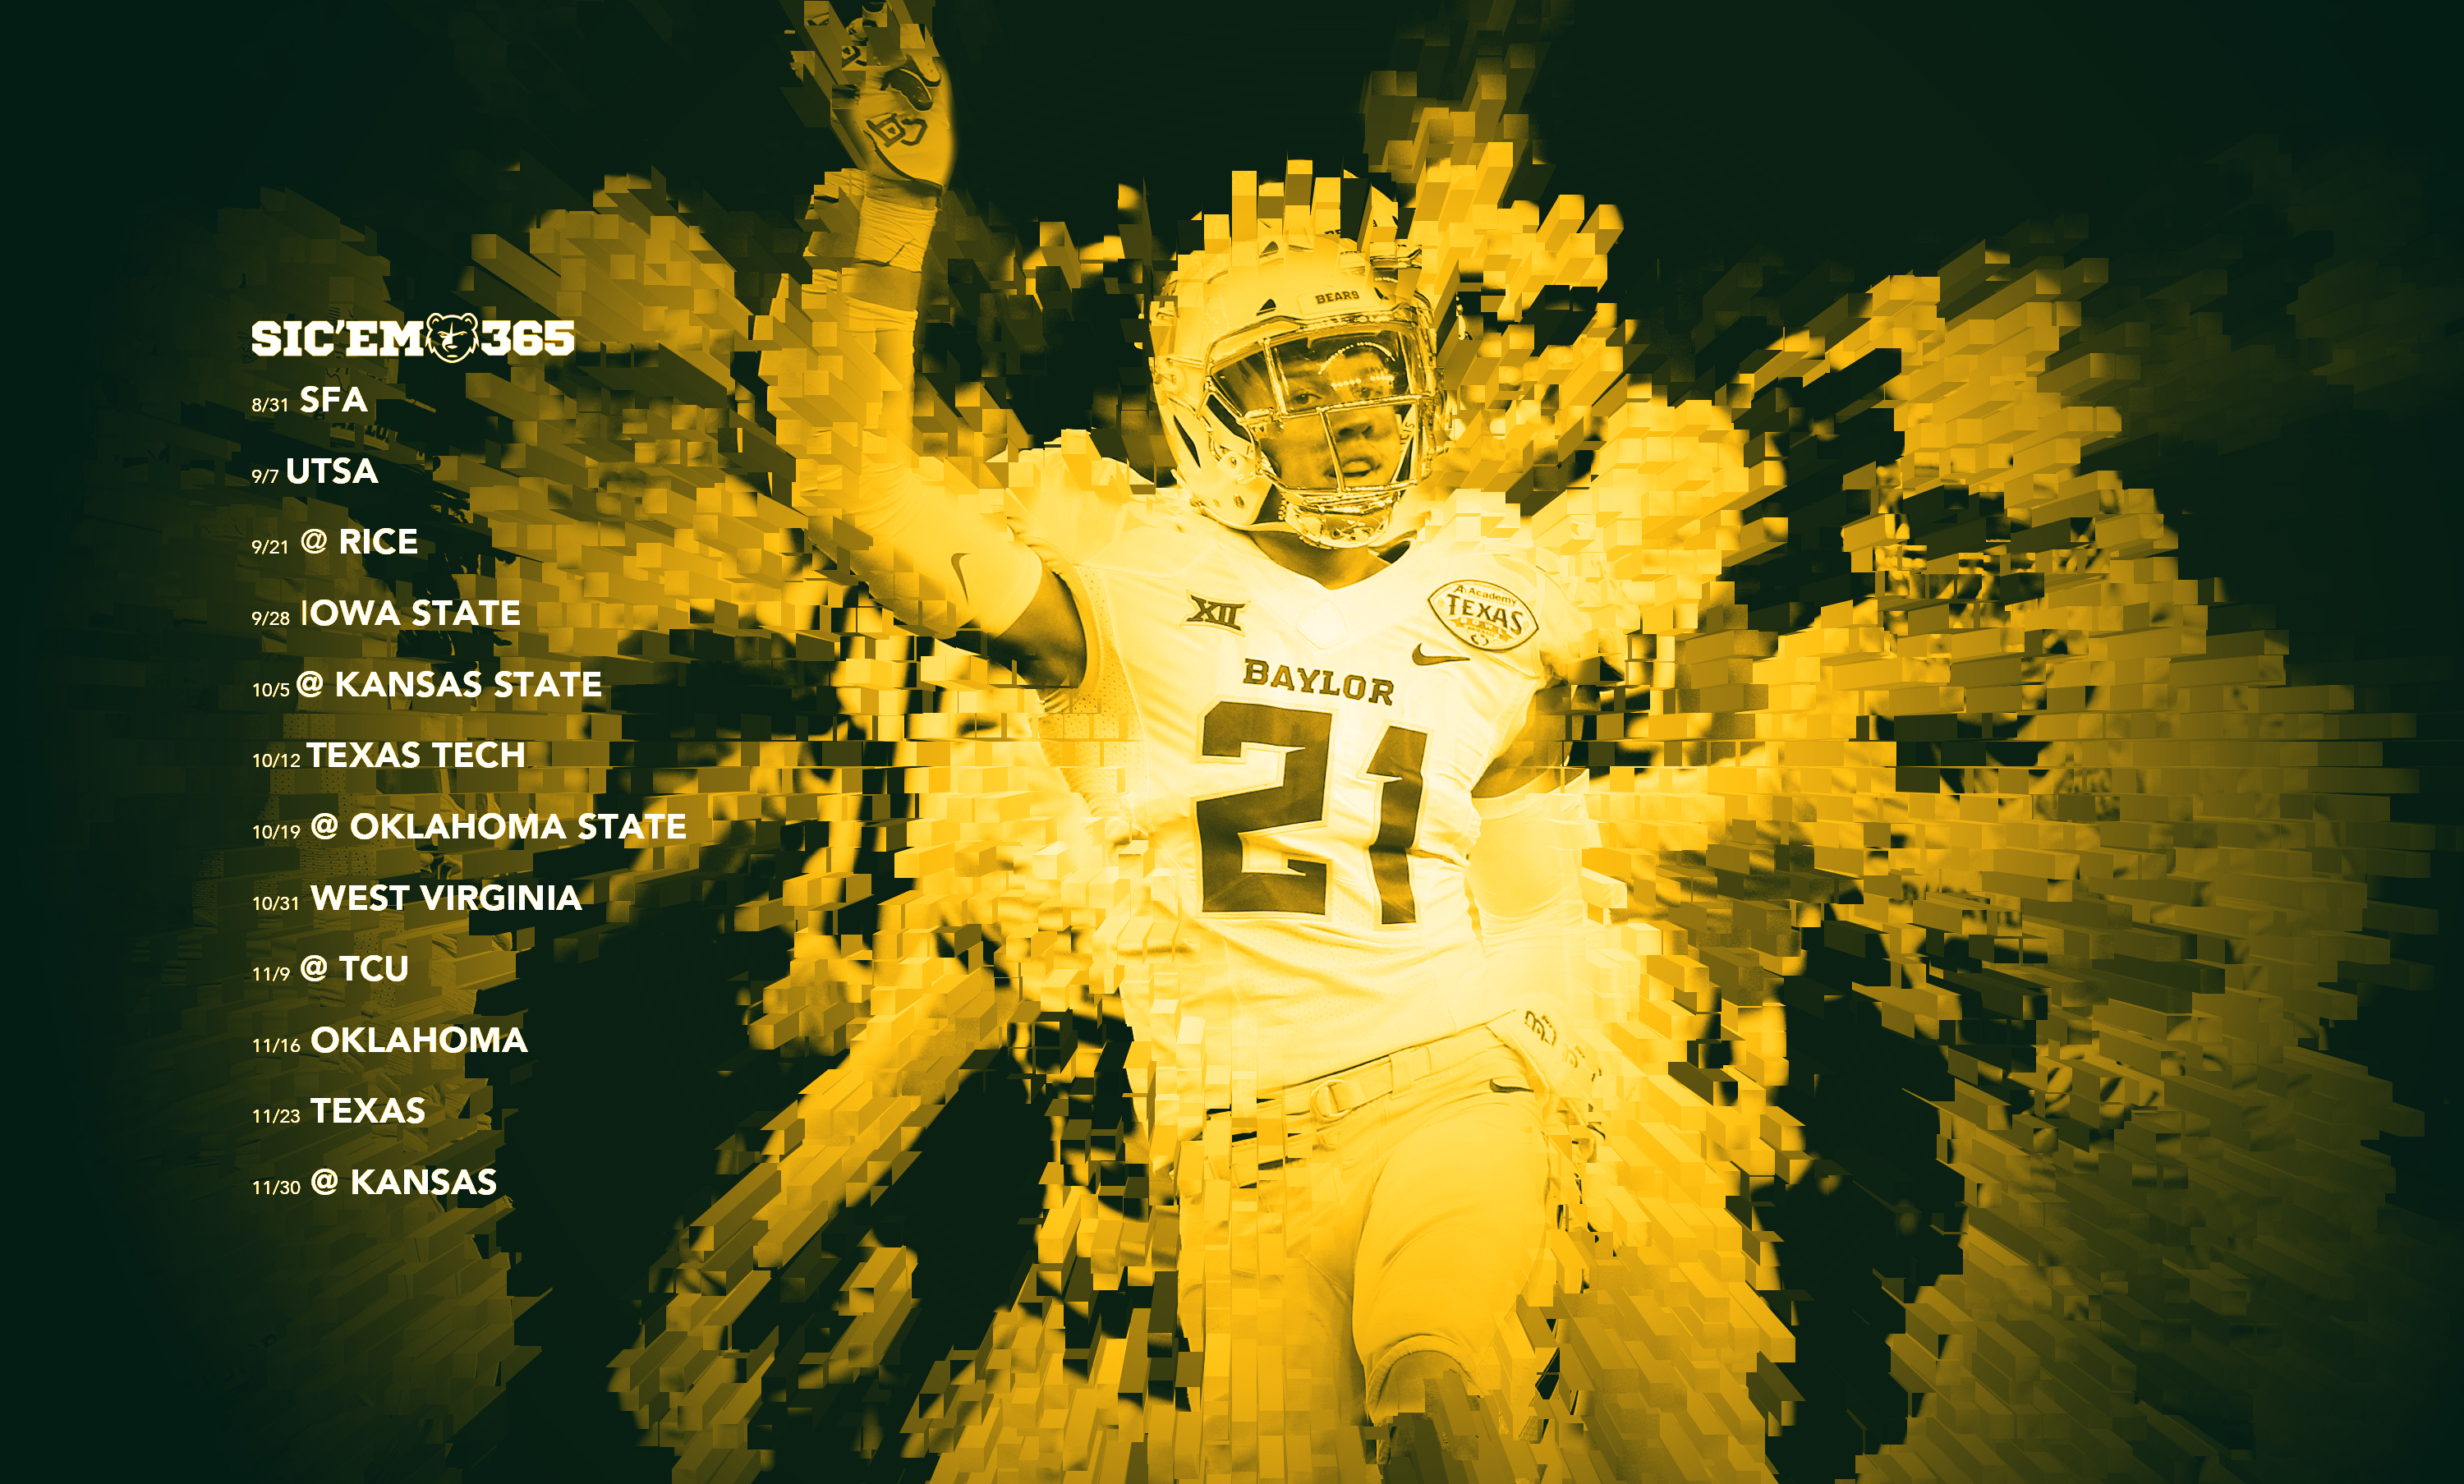 Baylor Football Wall Paper HD Wallpaper Background